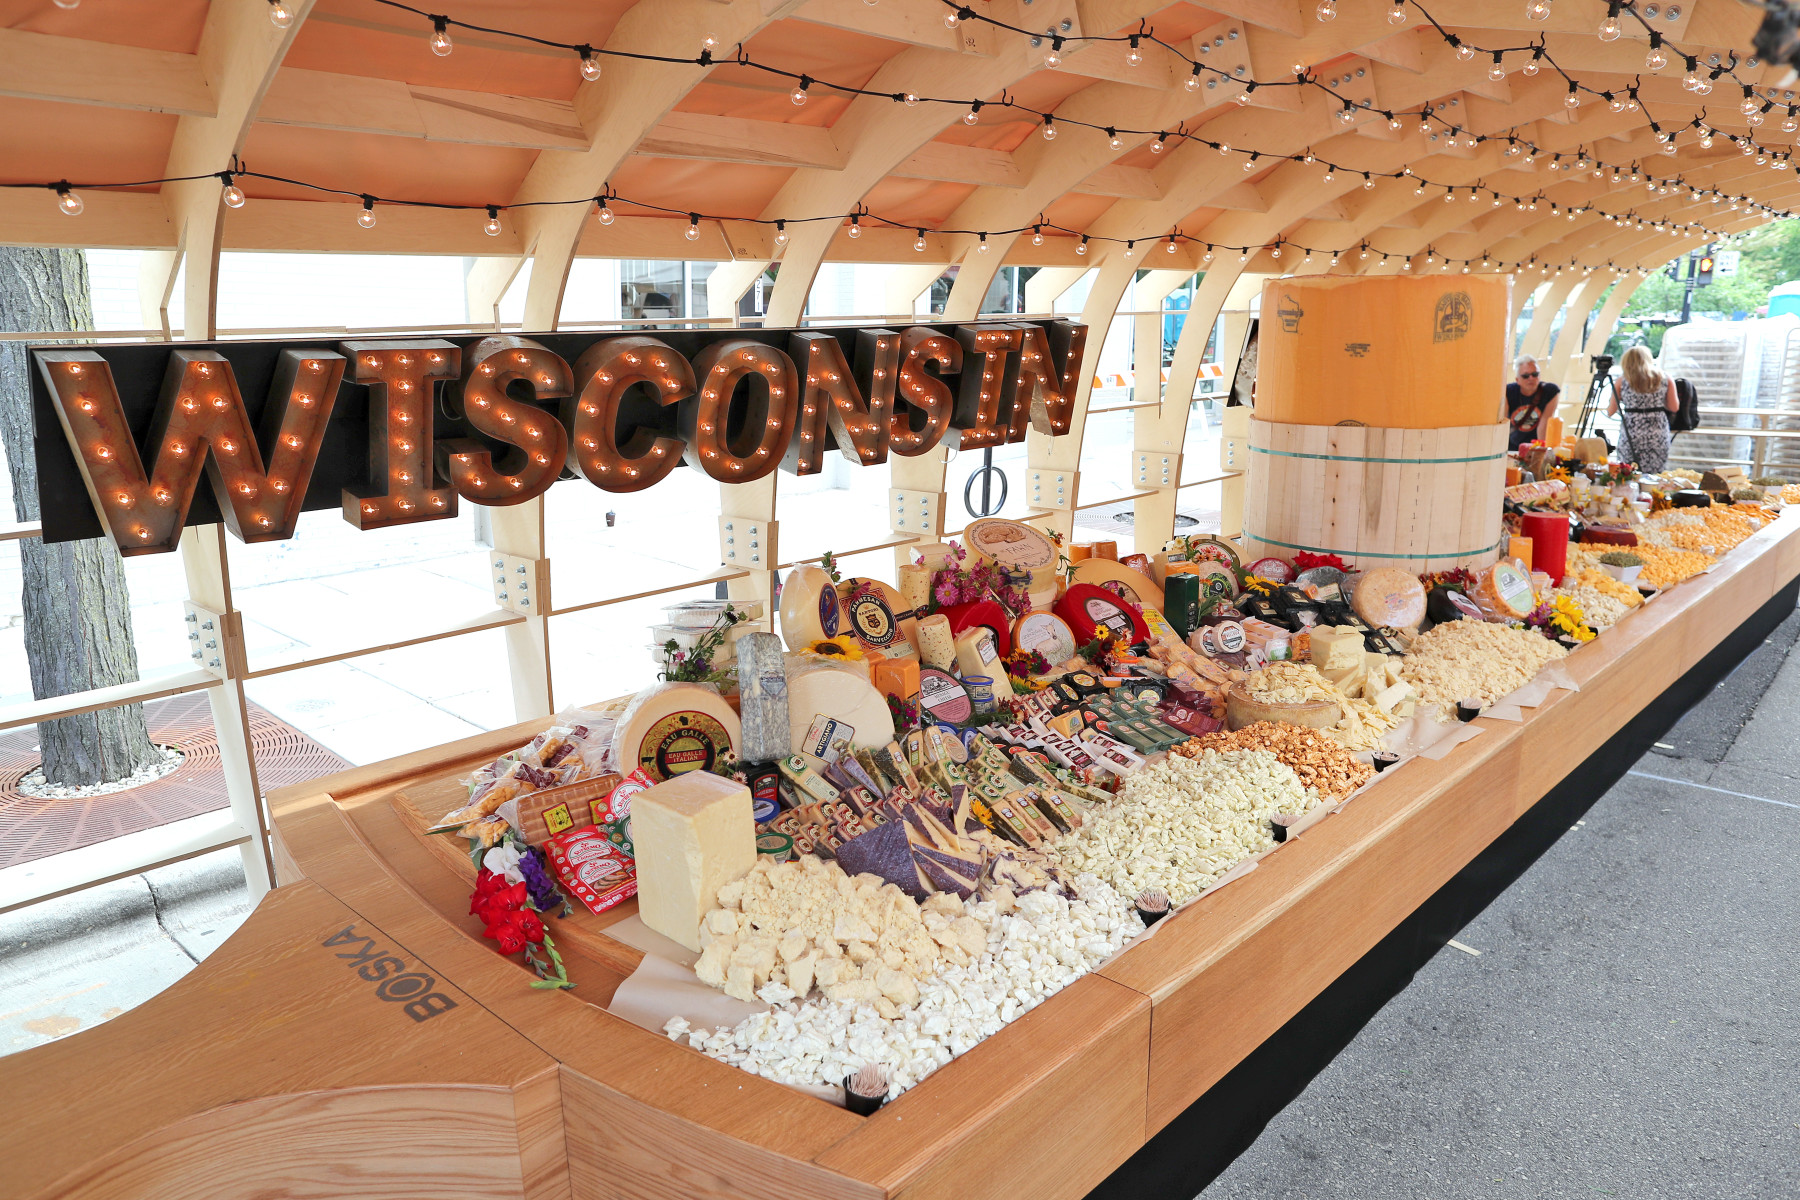 during a Guinness World Records winning attempt at the worlds largest cheeseboard in downtown Madison, Wis., on Wednesday, Aug. 1. The final weight of the cheese on the board came to 4,437 pounds.